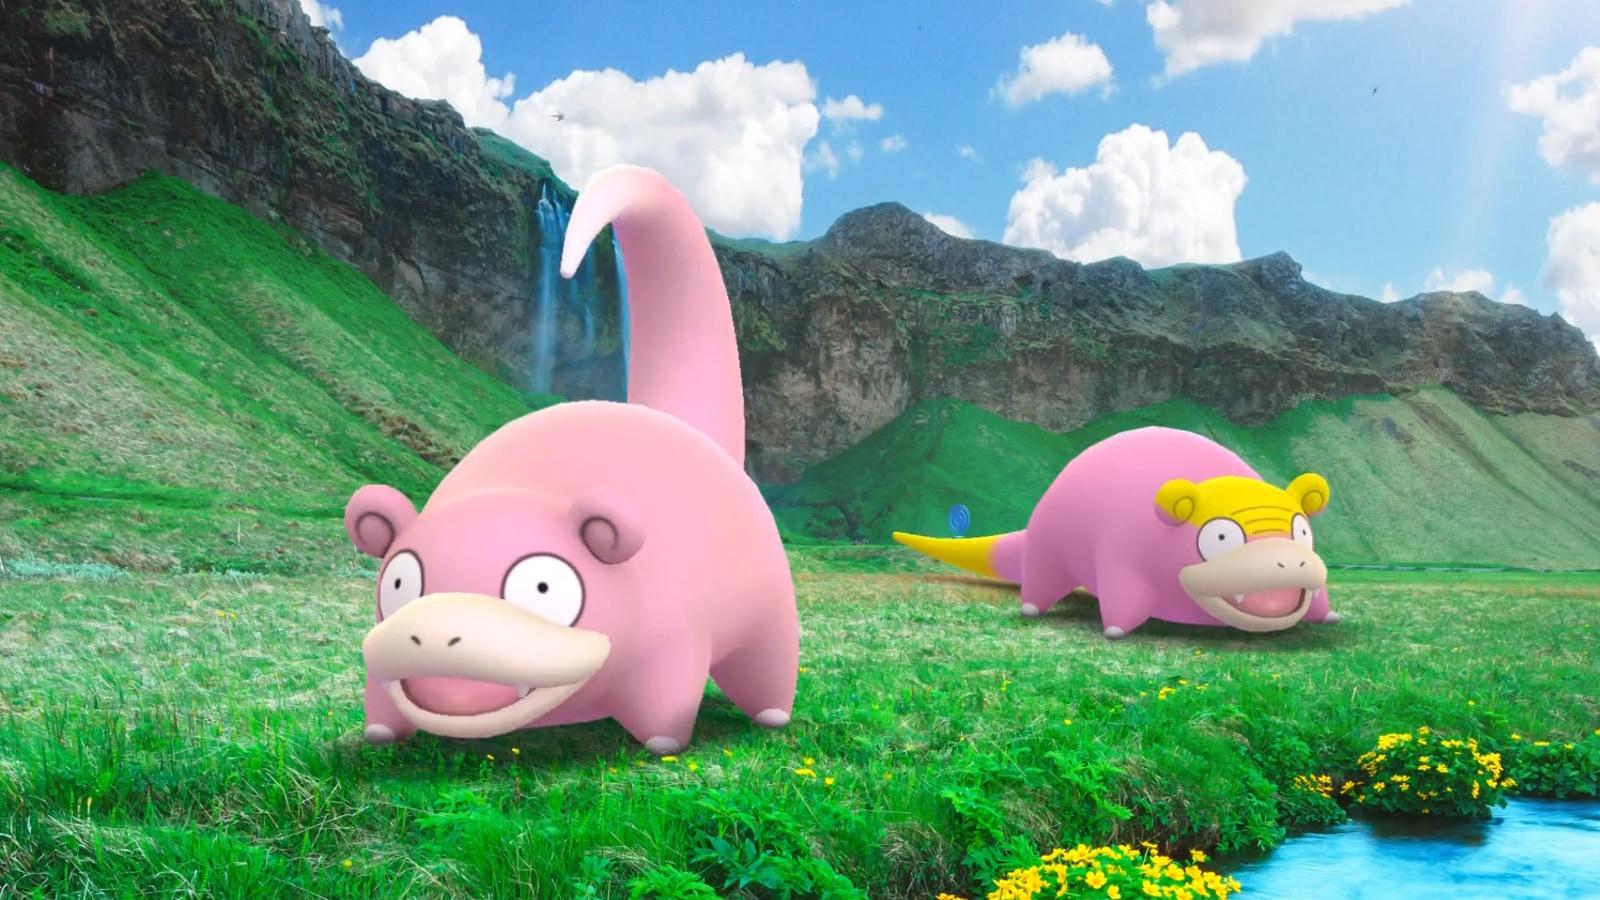 slowpoke and galarian slowpoke chilling on grass next to a small river.